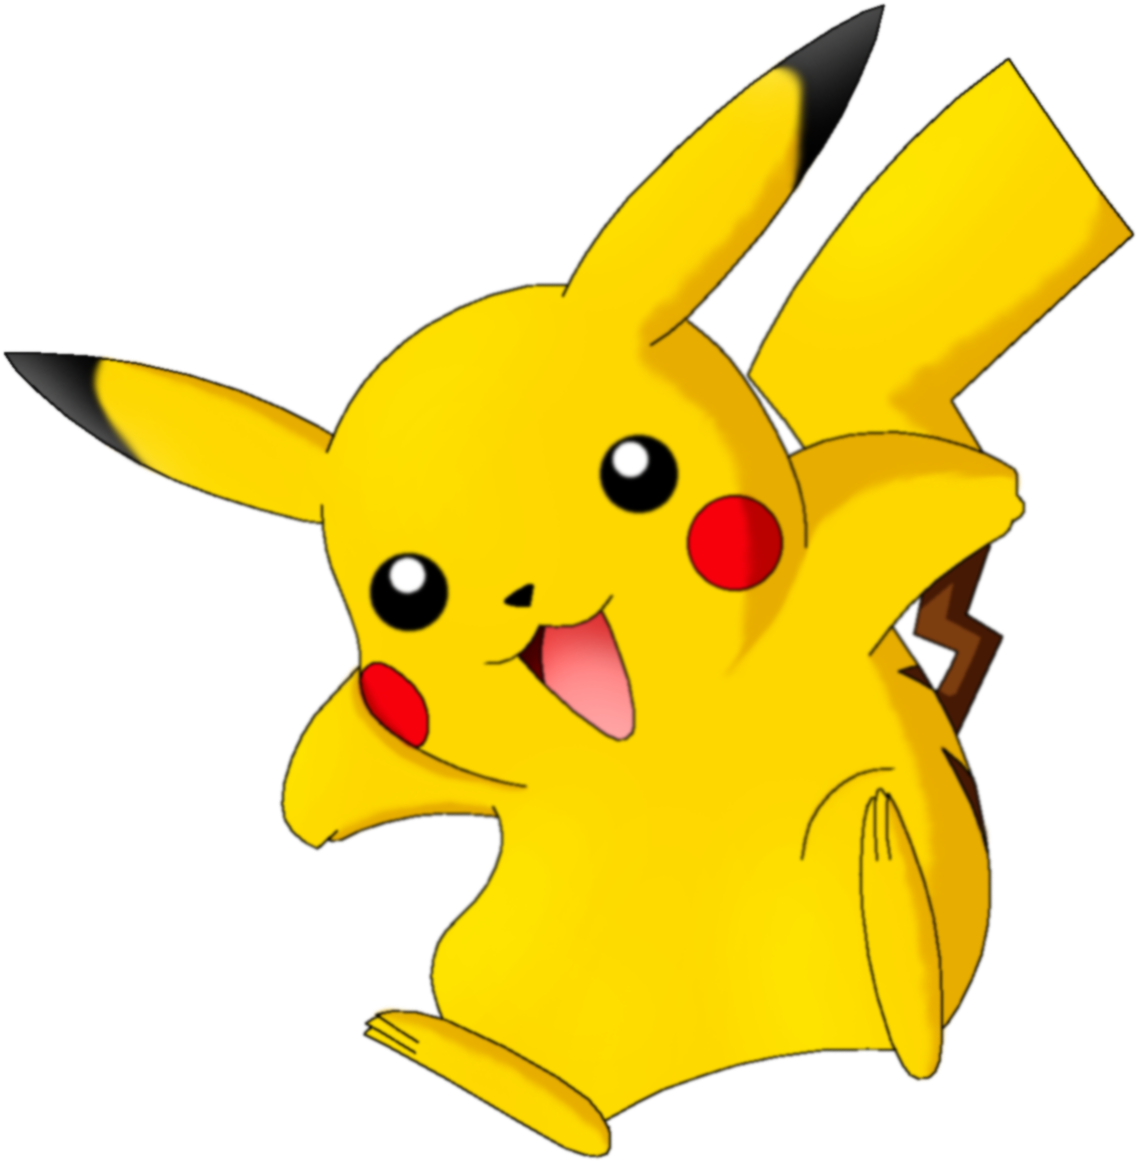 Image Result For Pokemon Anime Original Series Pikachu - Find The Difference Pokemon (1248x1232)